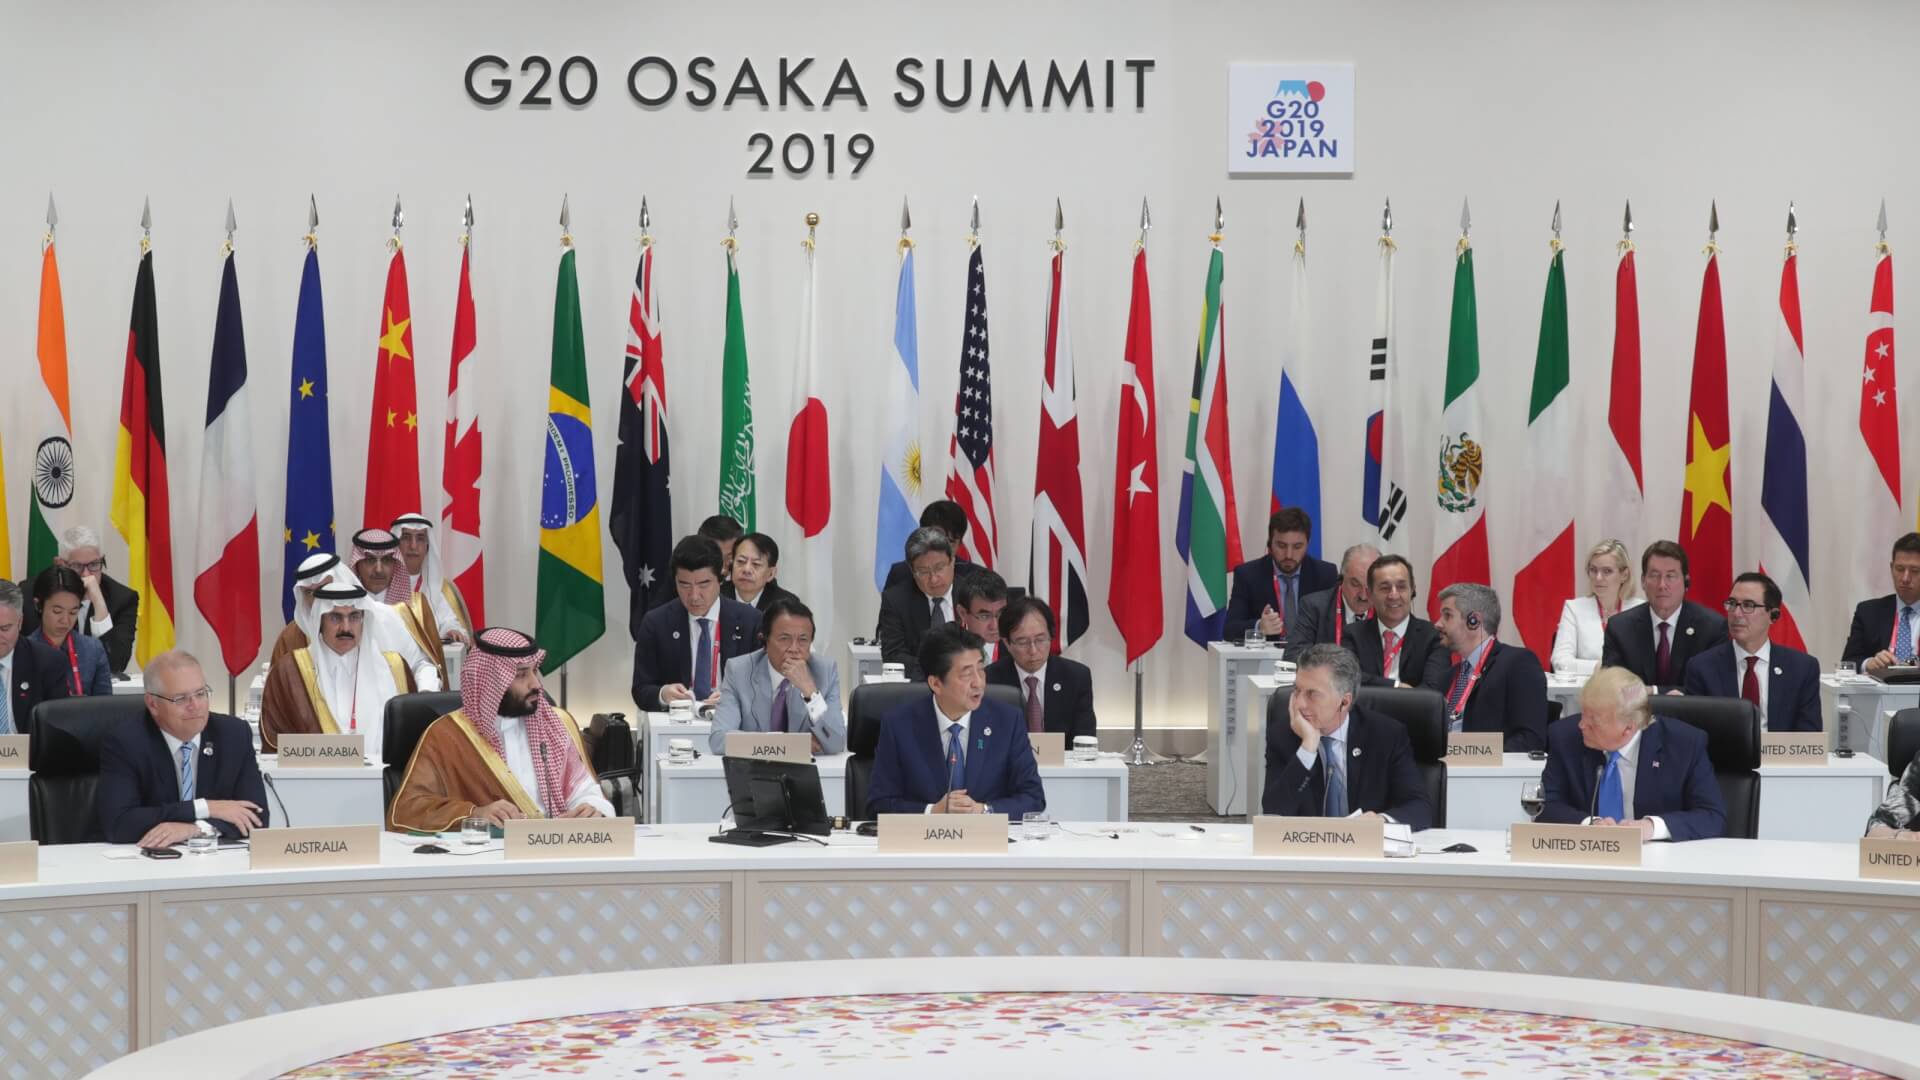 G20 Leaders Assemble to Deliver United Message on Economic Recovery